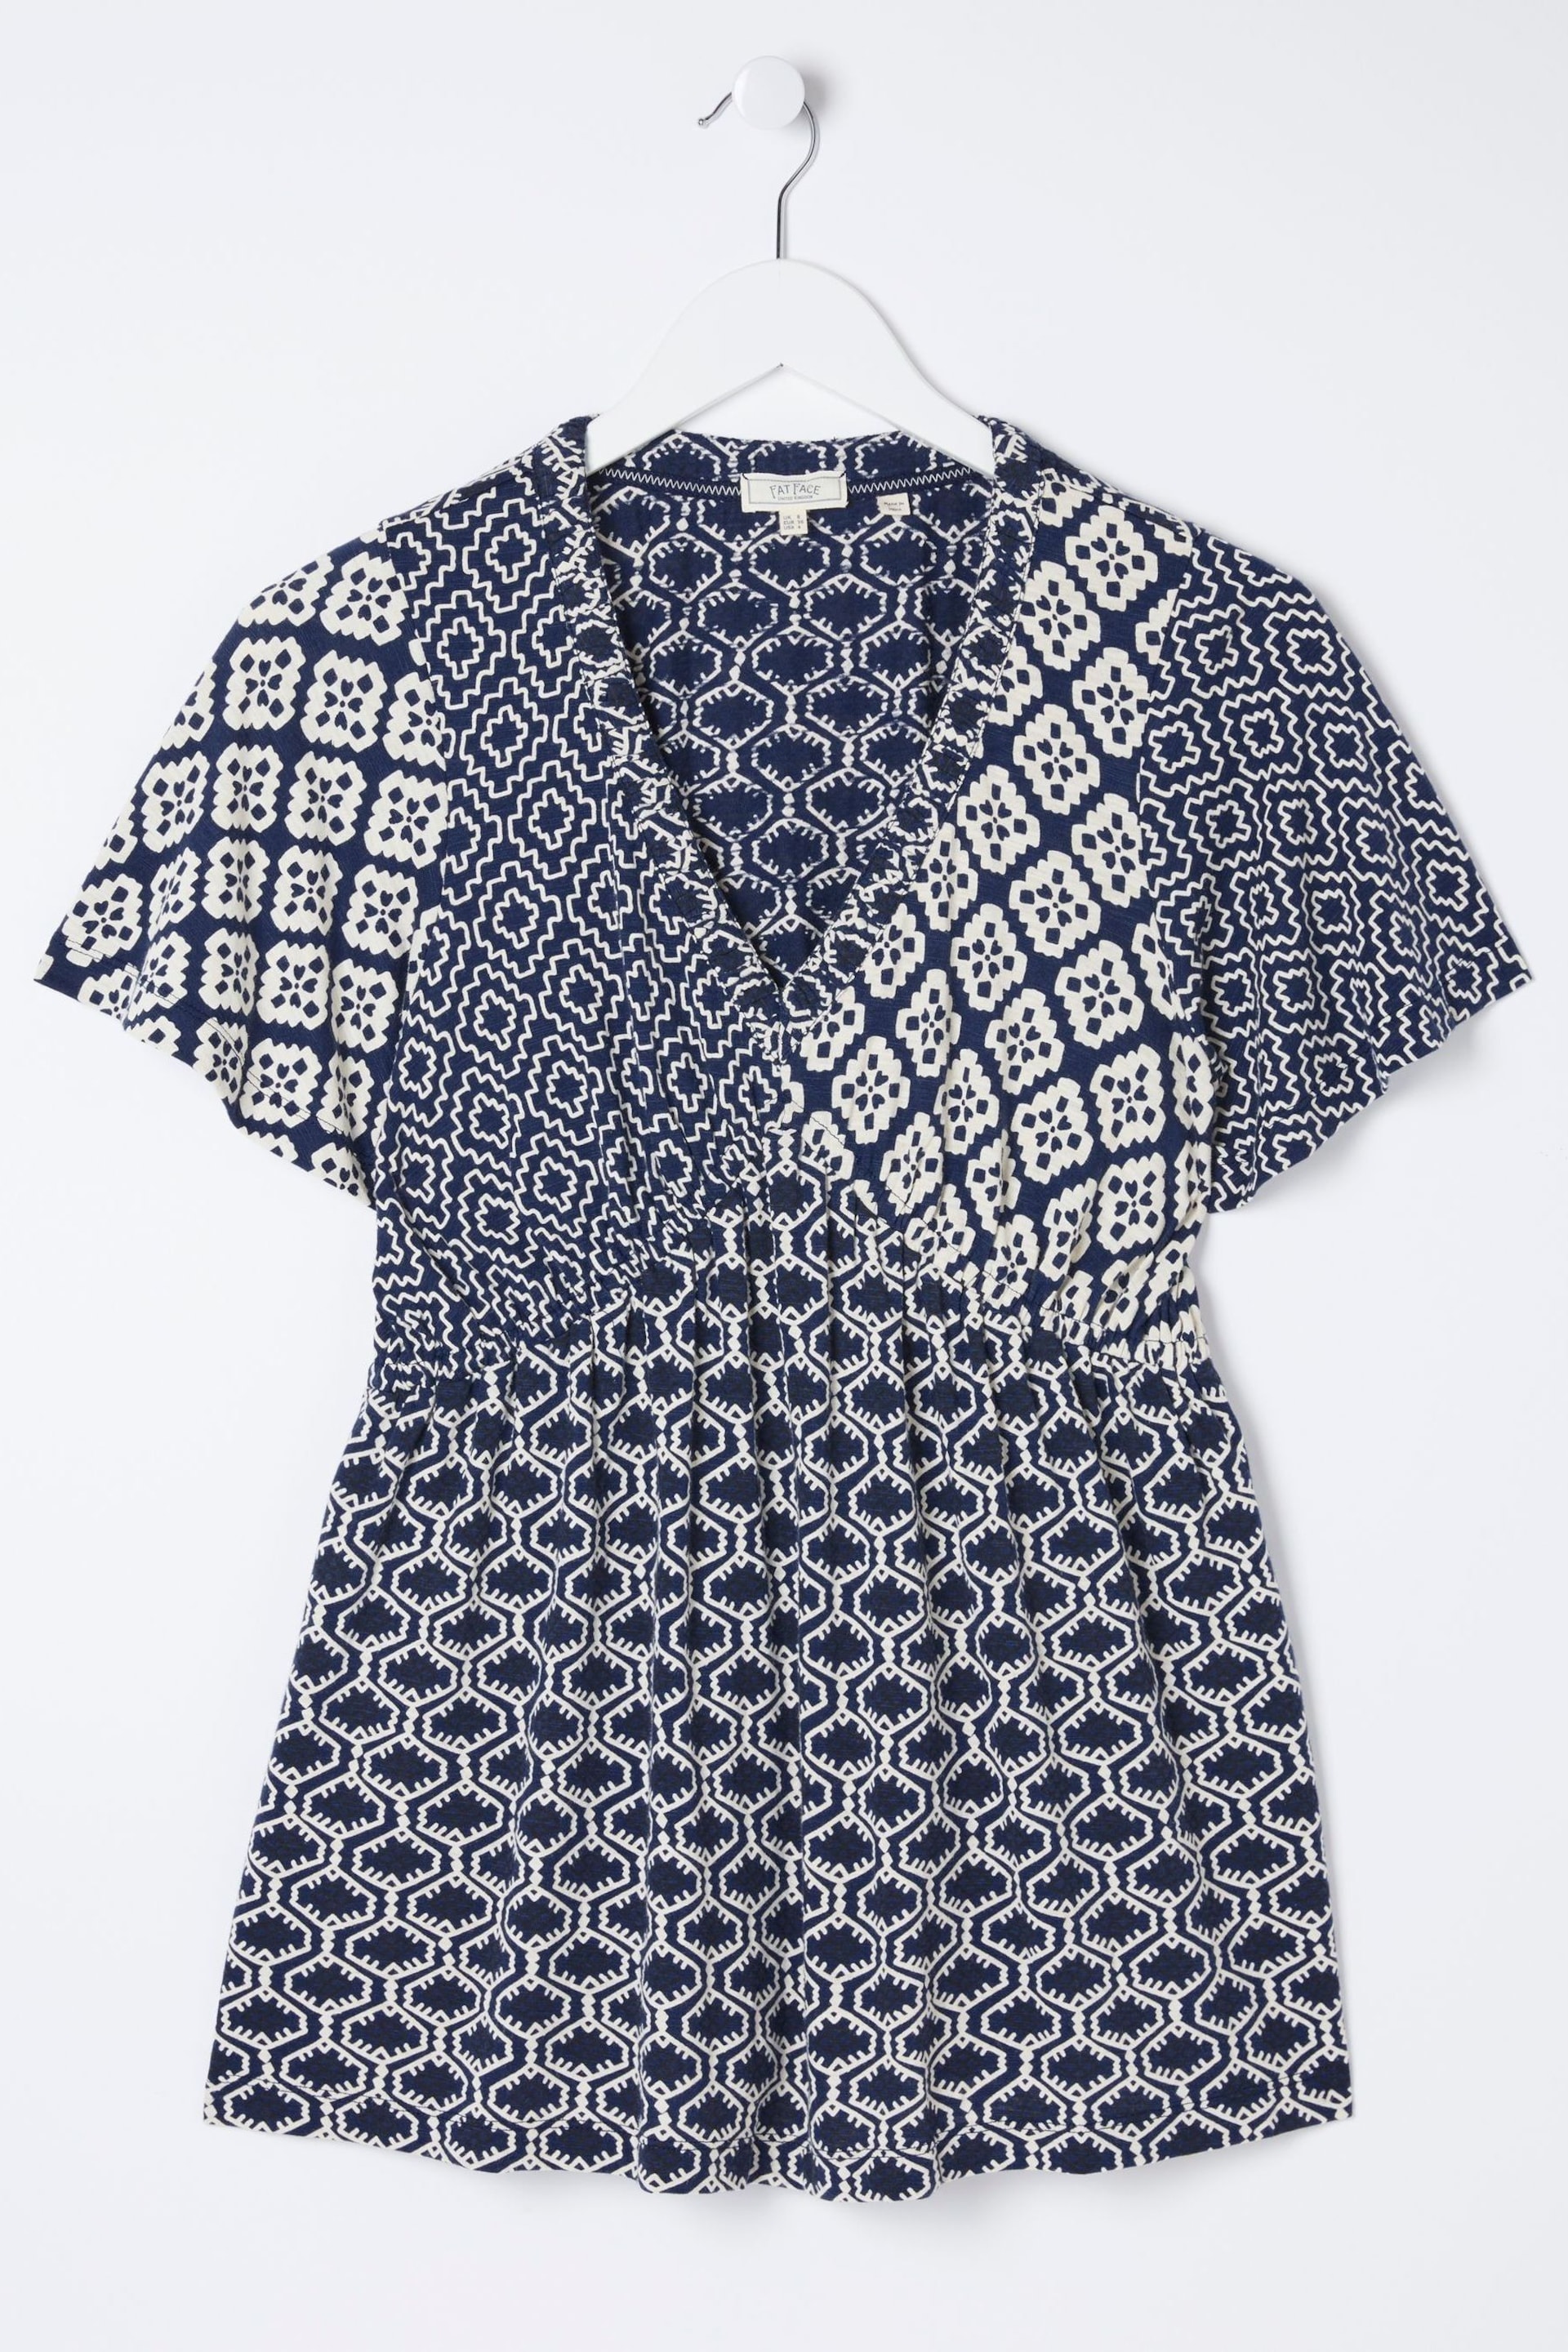 FatFace Blue Frankie Patchwork Geo Blouses - Image 4 of 5